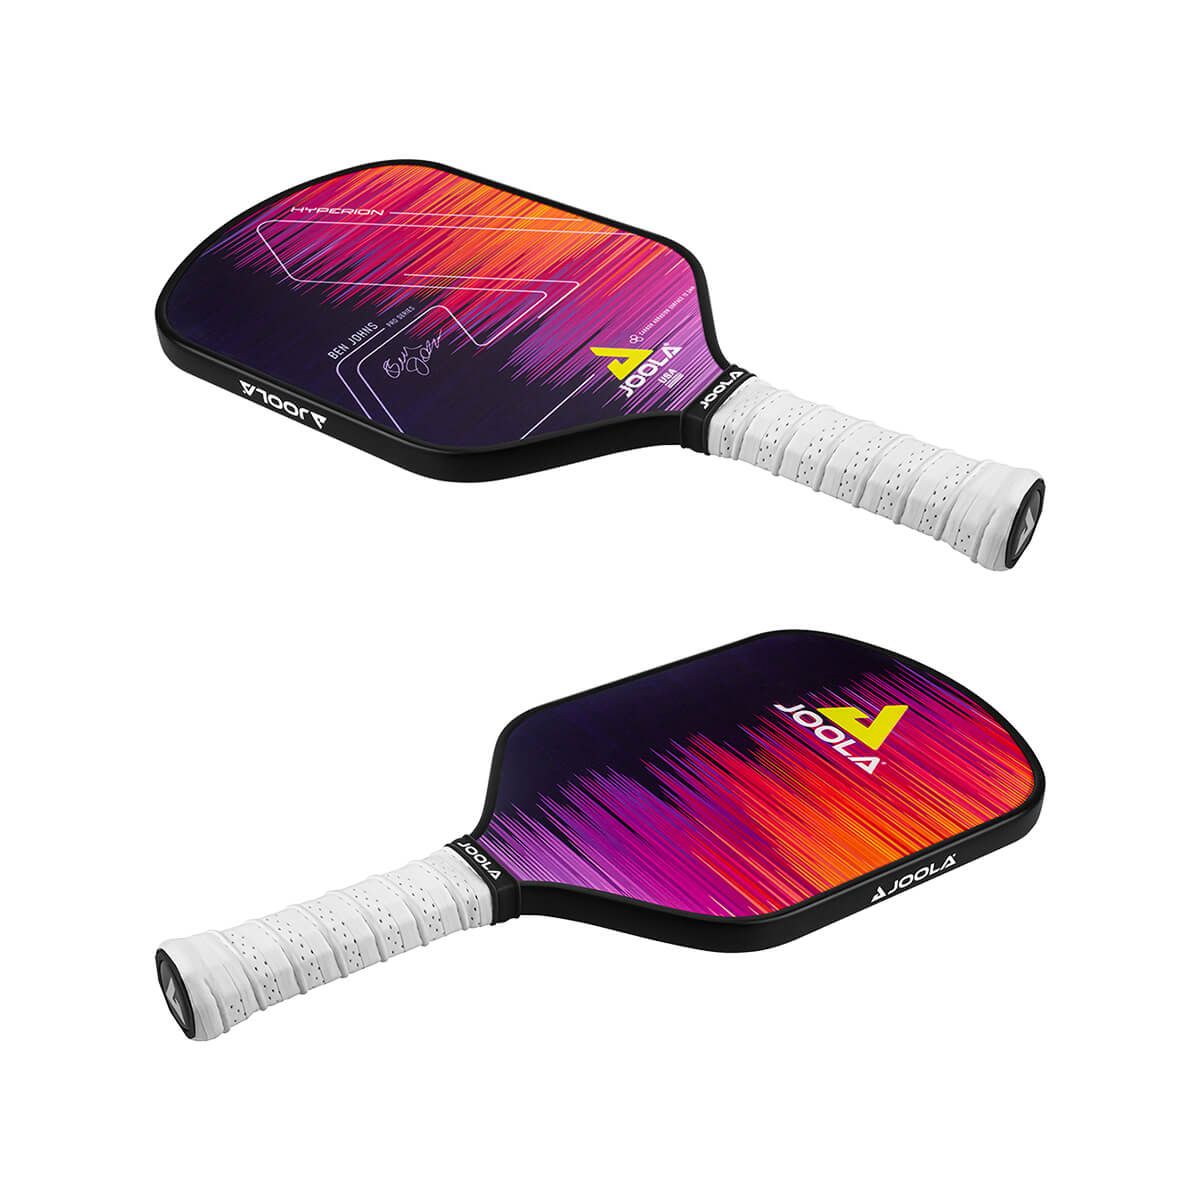 2 paddles of hyperion paddle